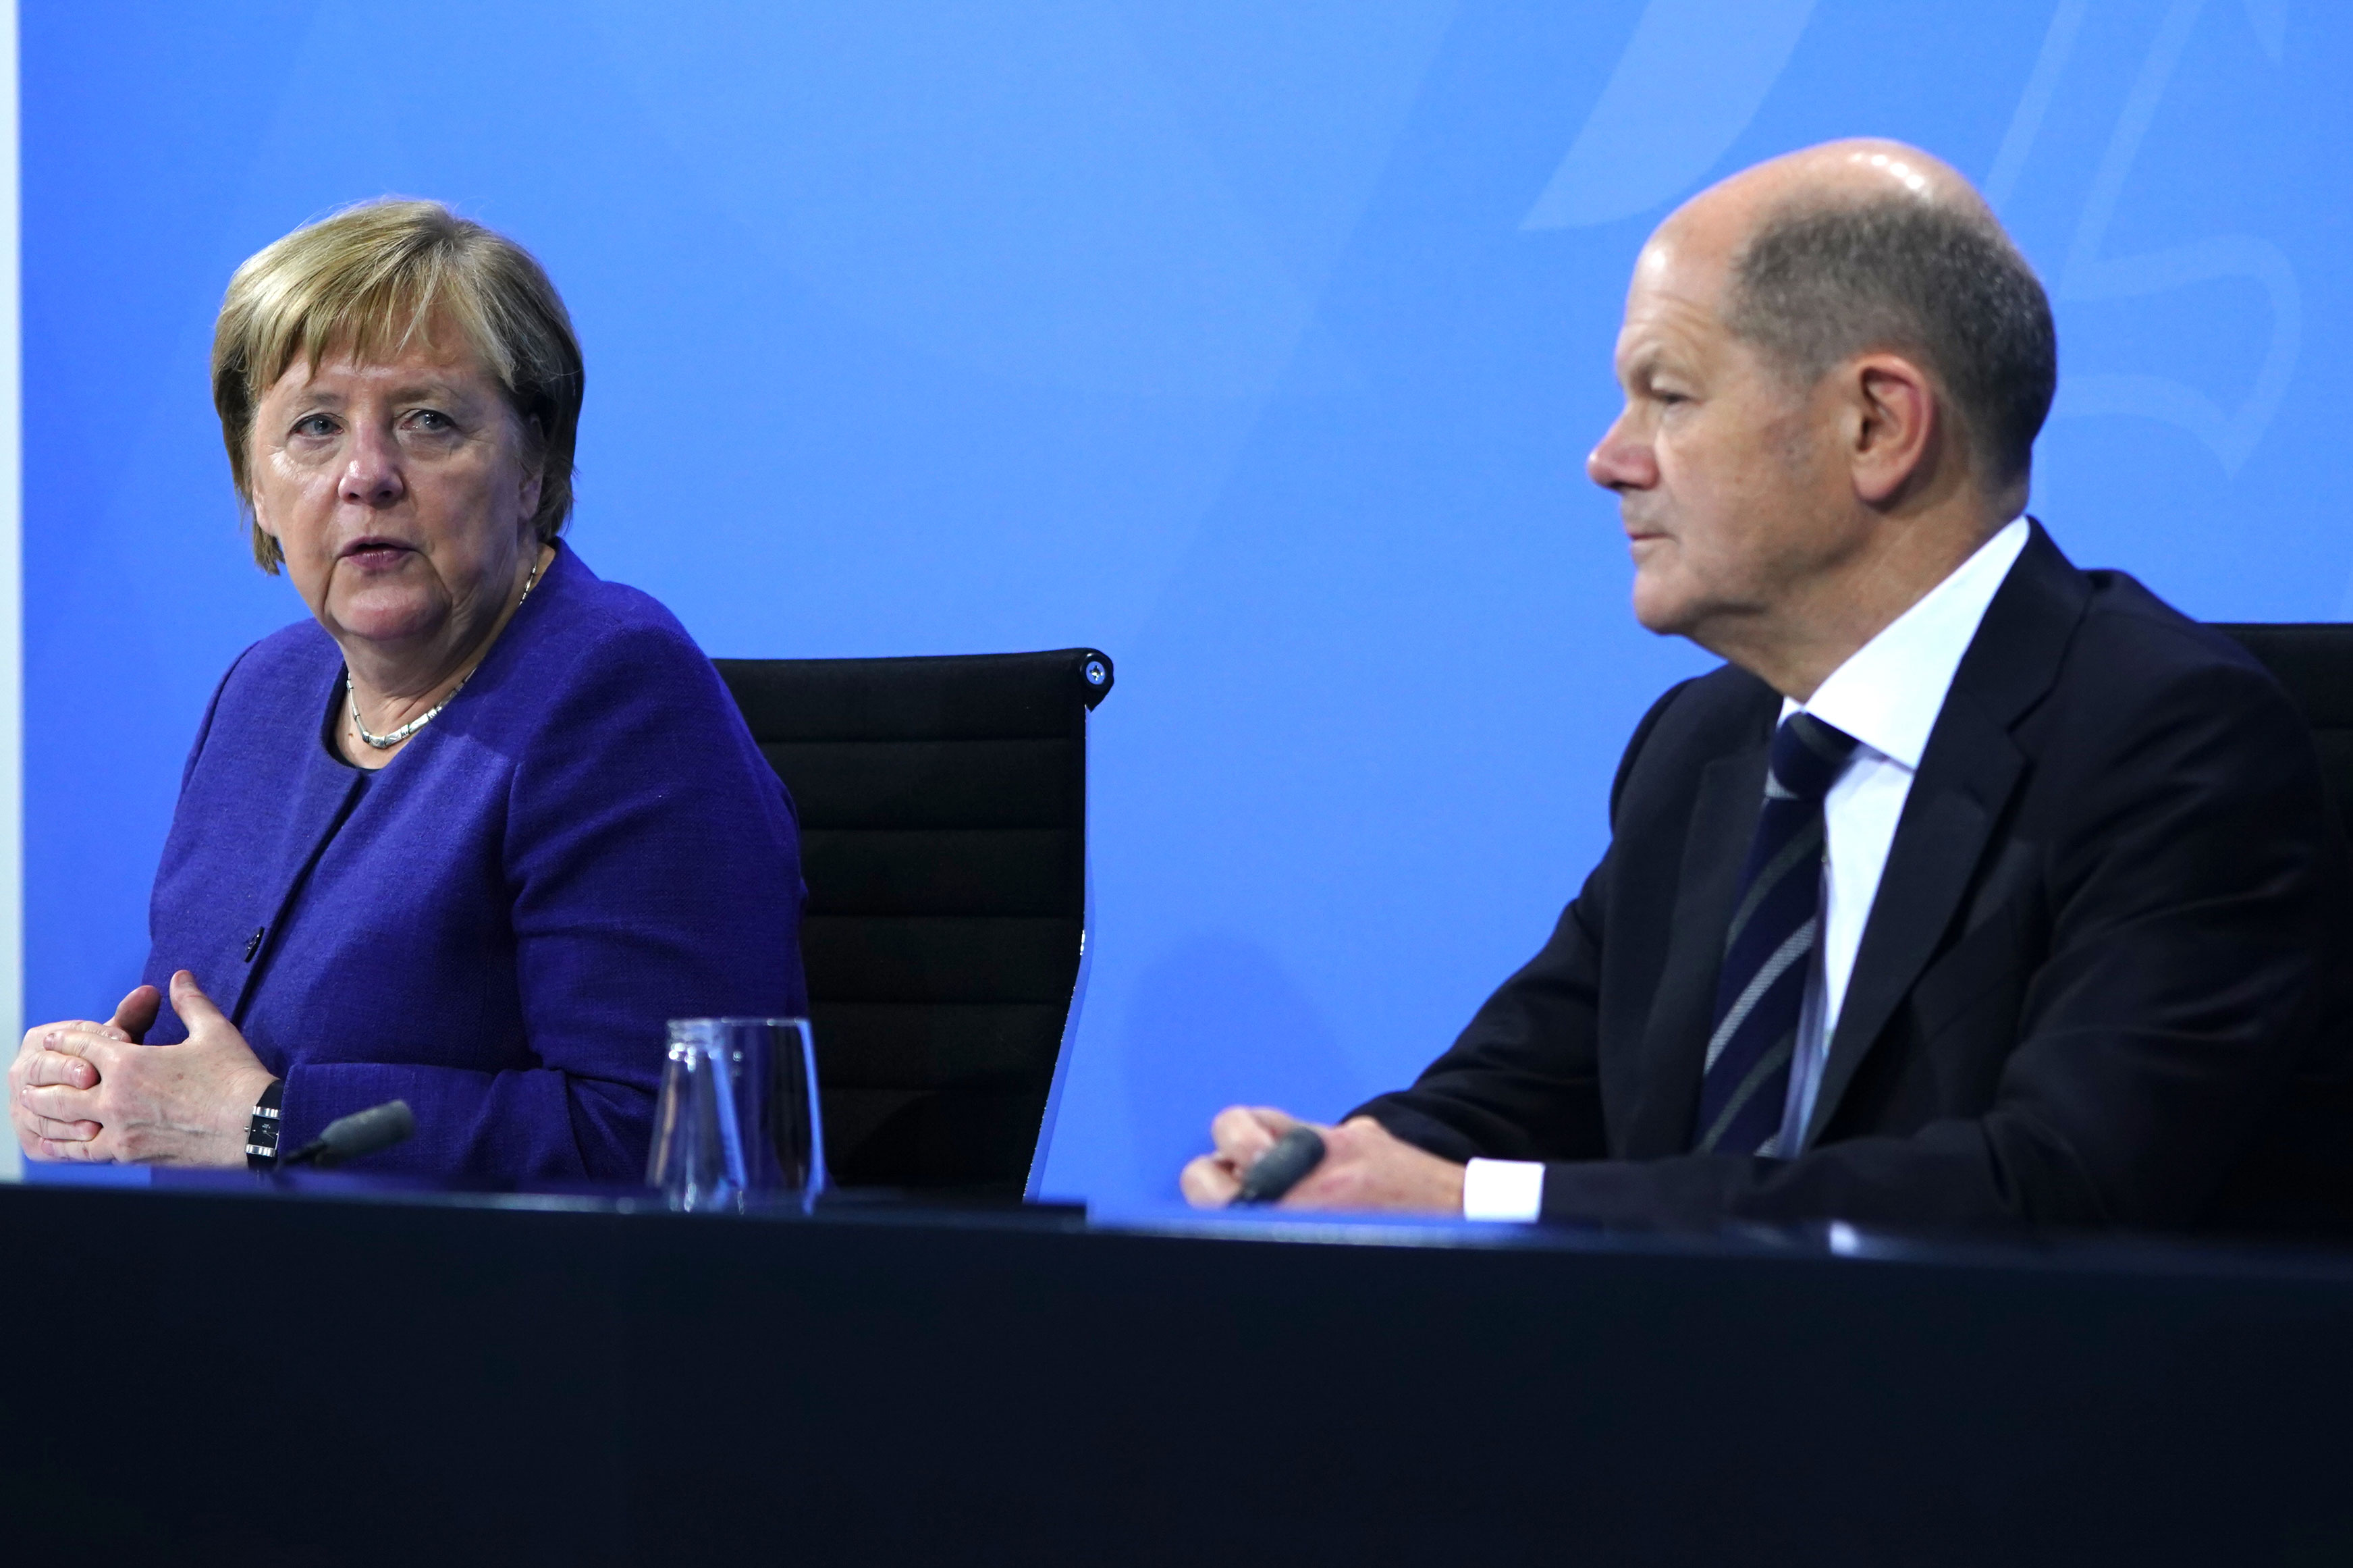 Acting Federal Chancellor Angela Merkel and Acting German Finance Minister Olaf Scholz during a press conference after a meeting on the current coronavirus situation on November 18, 2021 in Berlin.